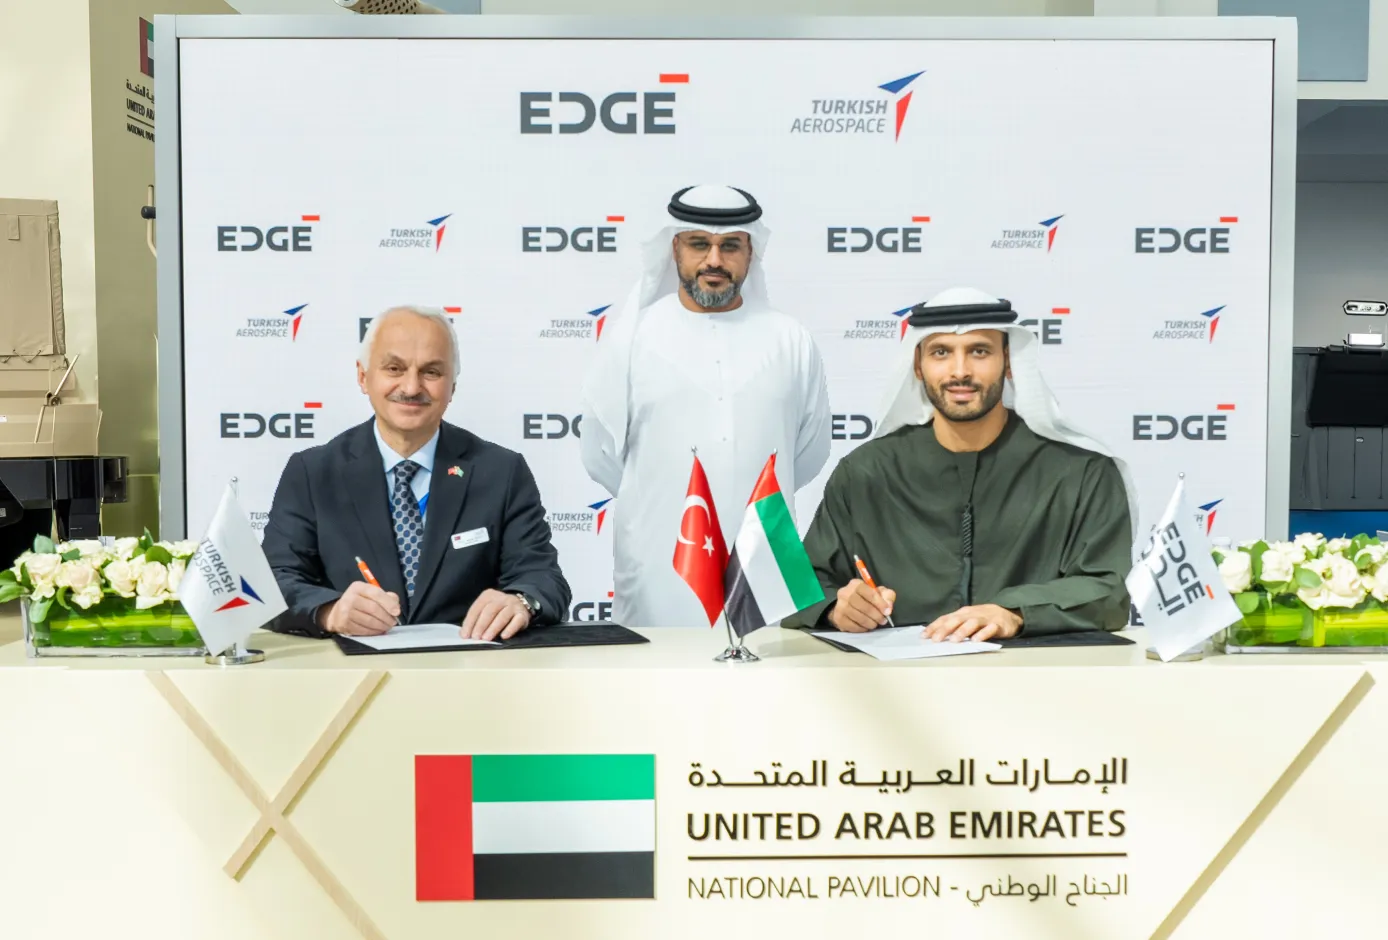 Turkish Aerospace President and CEO Professor Temel Kotil and EDGE Group Platforms & Systems President Khaled Al Zaabi are seen signing documents during a memorandum of agreement ceremony. In the back, a facilitator oversees the procedure. A white panel with EDGE and Turkish Aerospace's logos printed on it serves as their background. The table where the signing is taking place on has the UAE, Turkey, and the company's flags propped up on it.